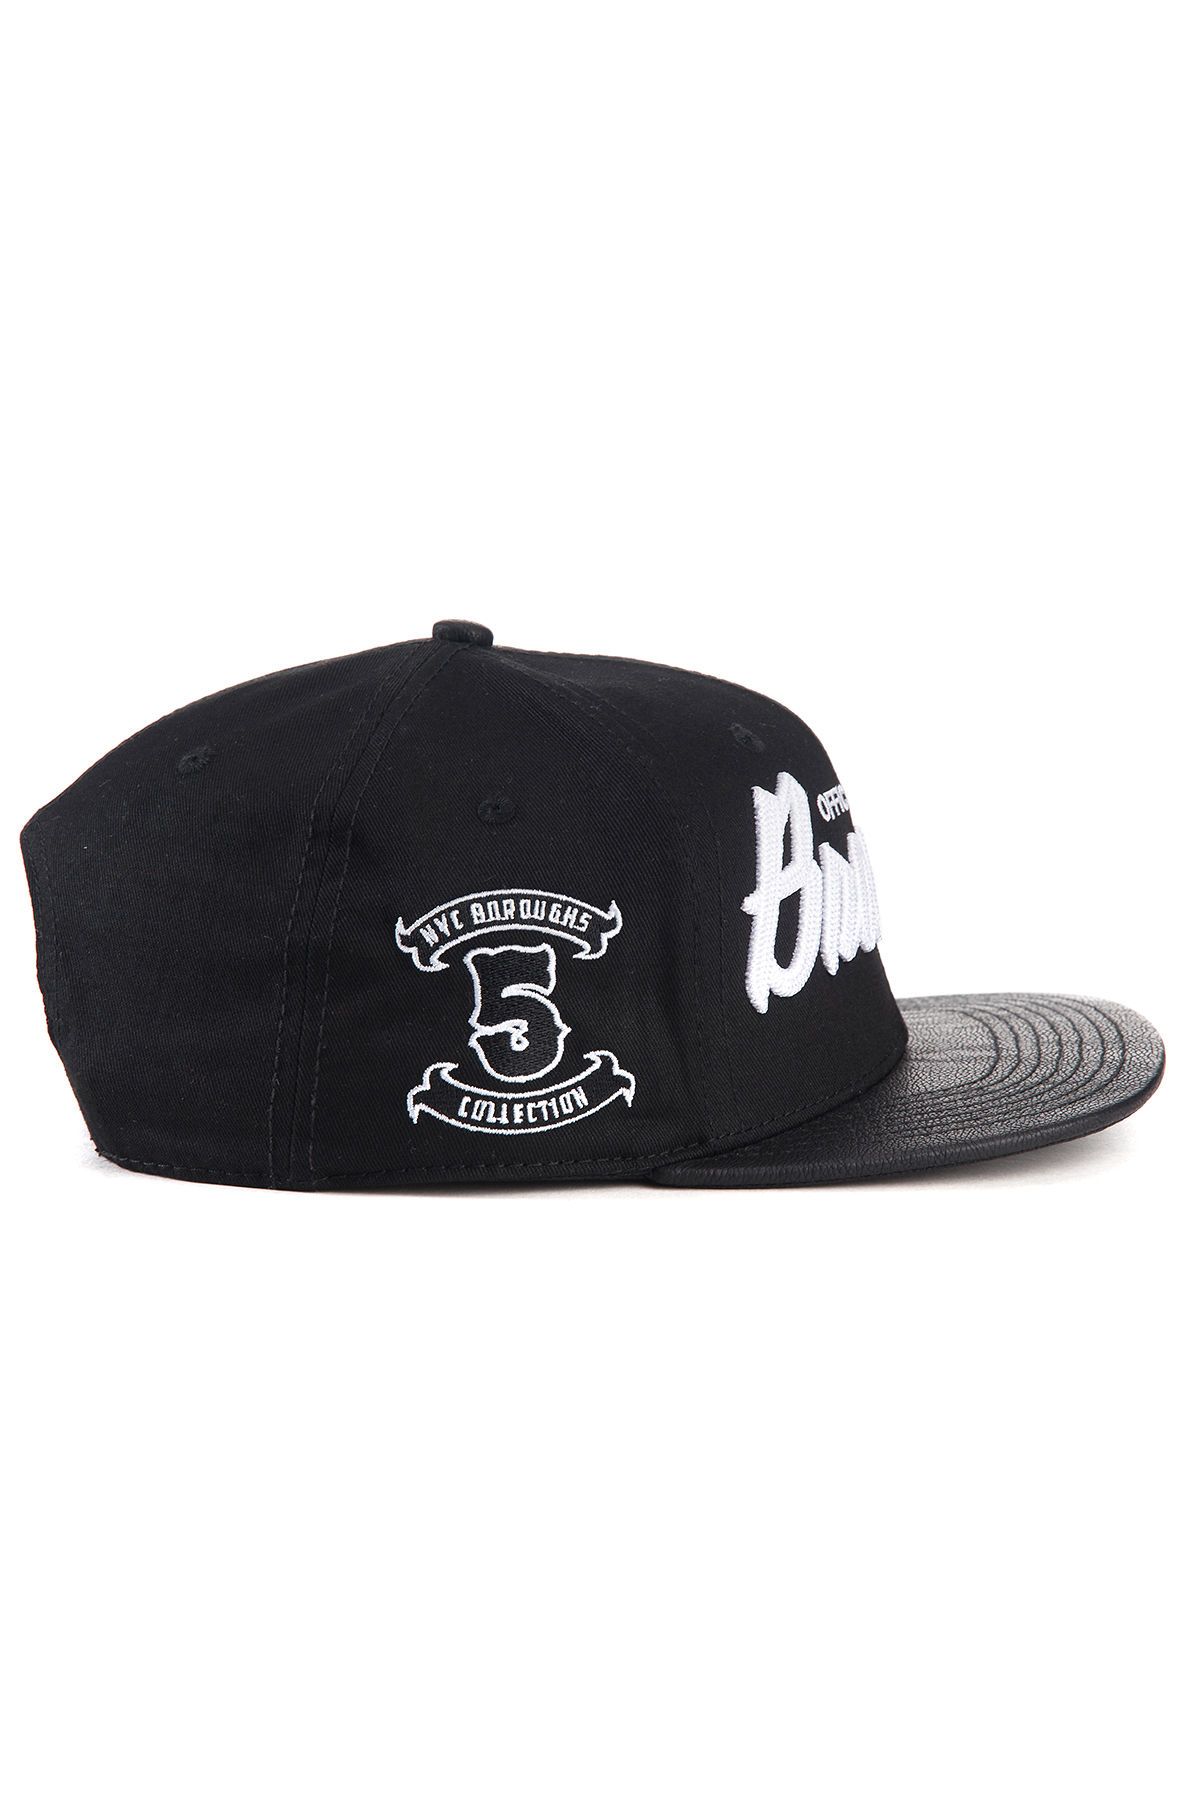 OFFICIAL CROWN OF LAUREL The Brooklyn Snapback Hat in W15-1738BLK - Shiekh